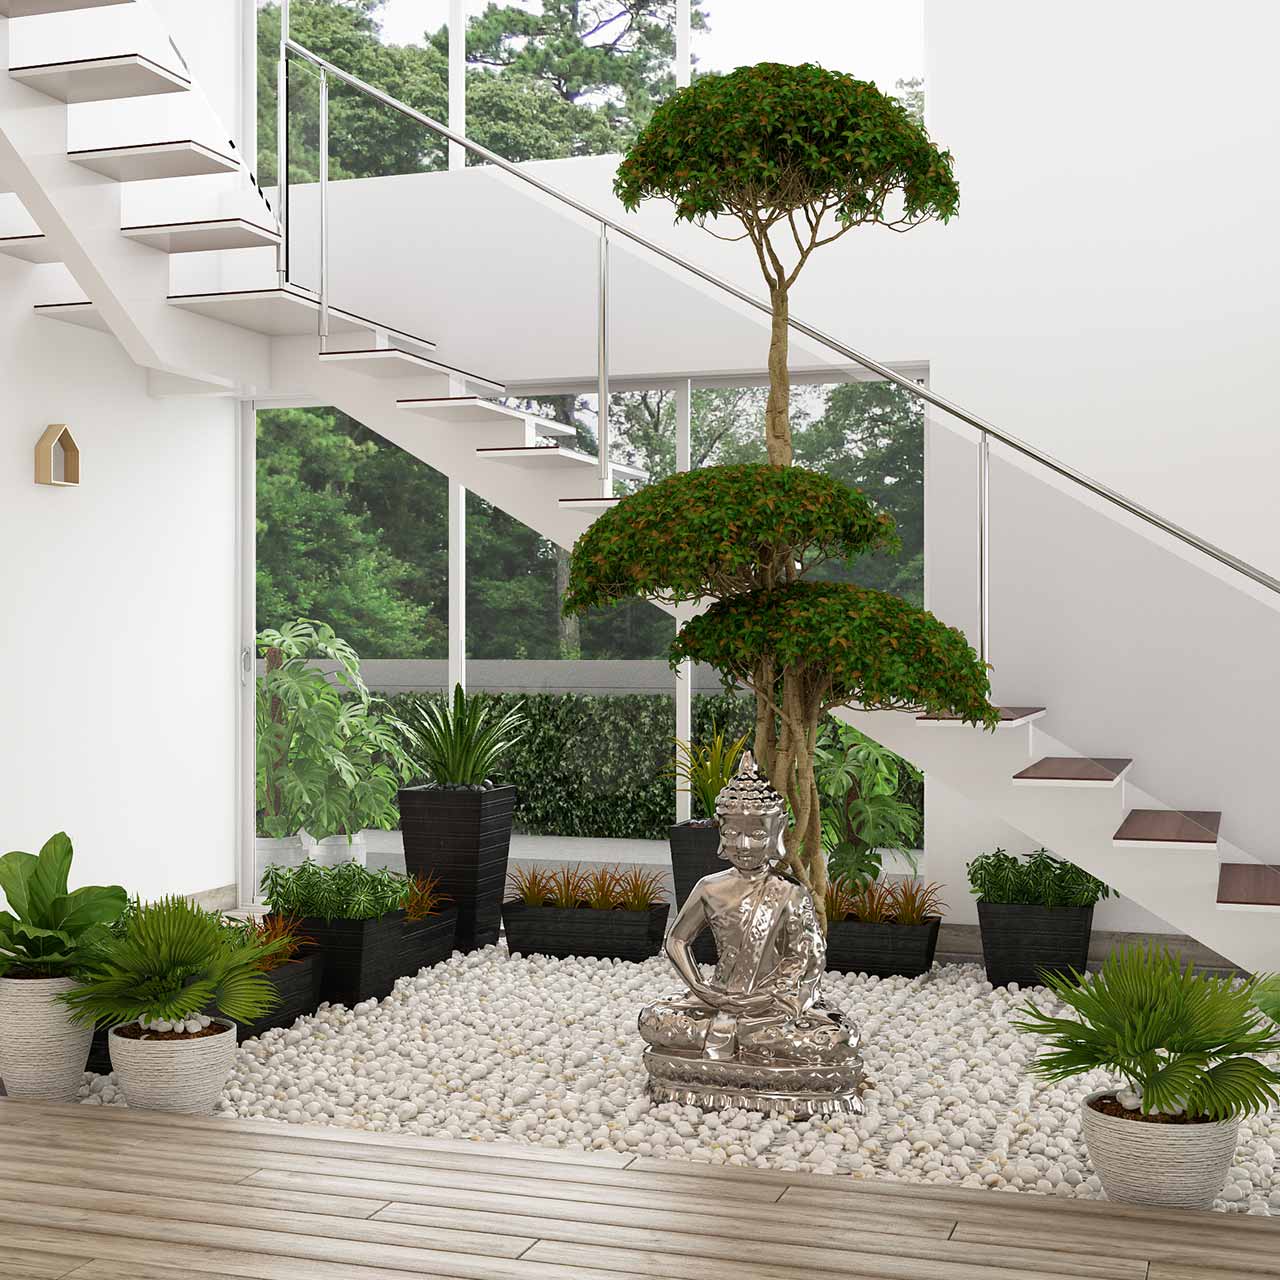 Design your living room interiors with a vibrant natural plants will make your living room lively